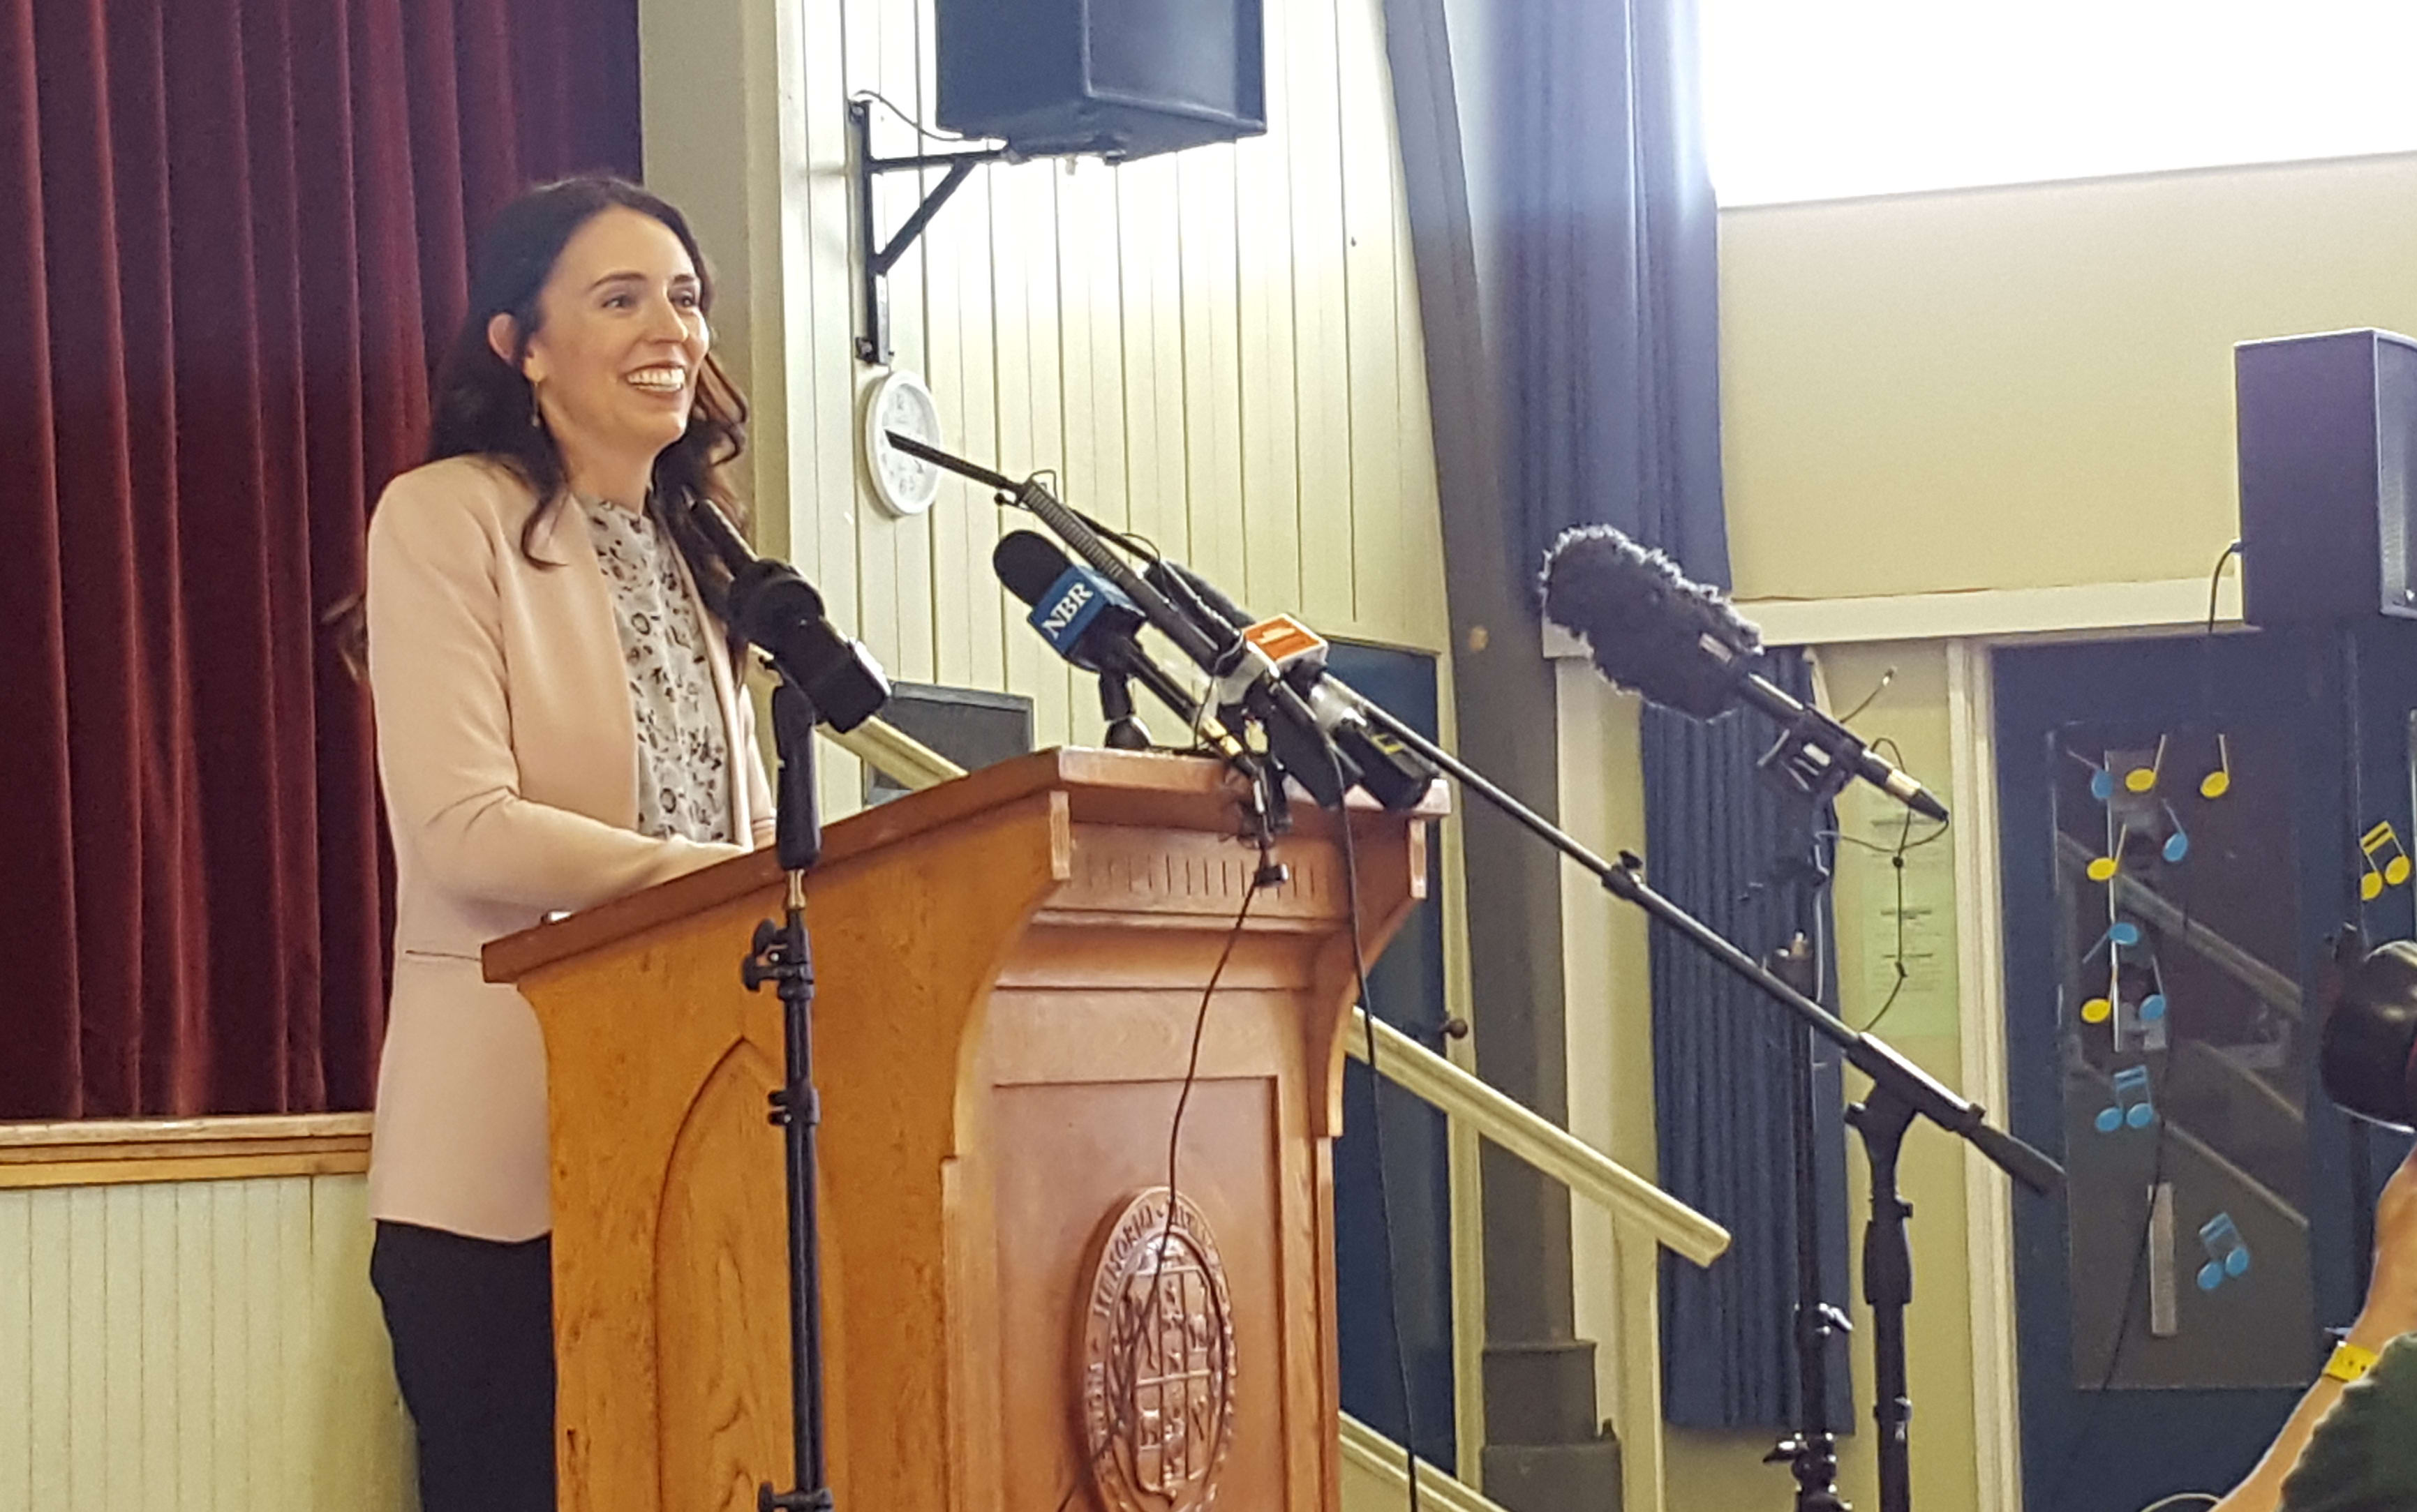 Labour Party leader Jacinda Ardern announces the party's education policy at Western Springs College in Auckland.